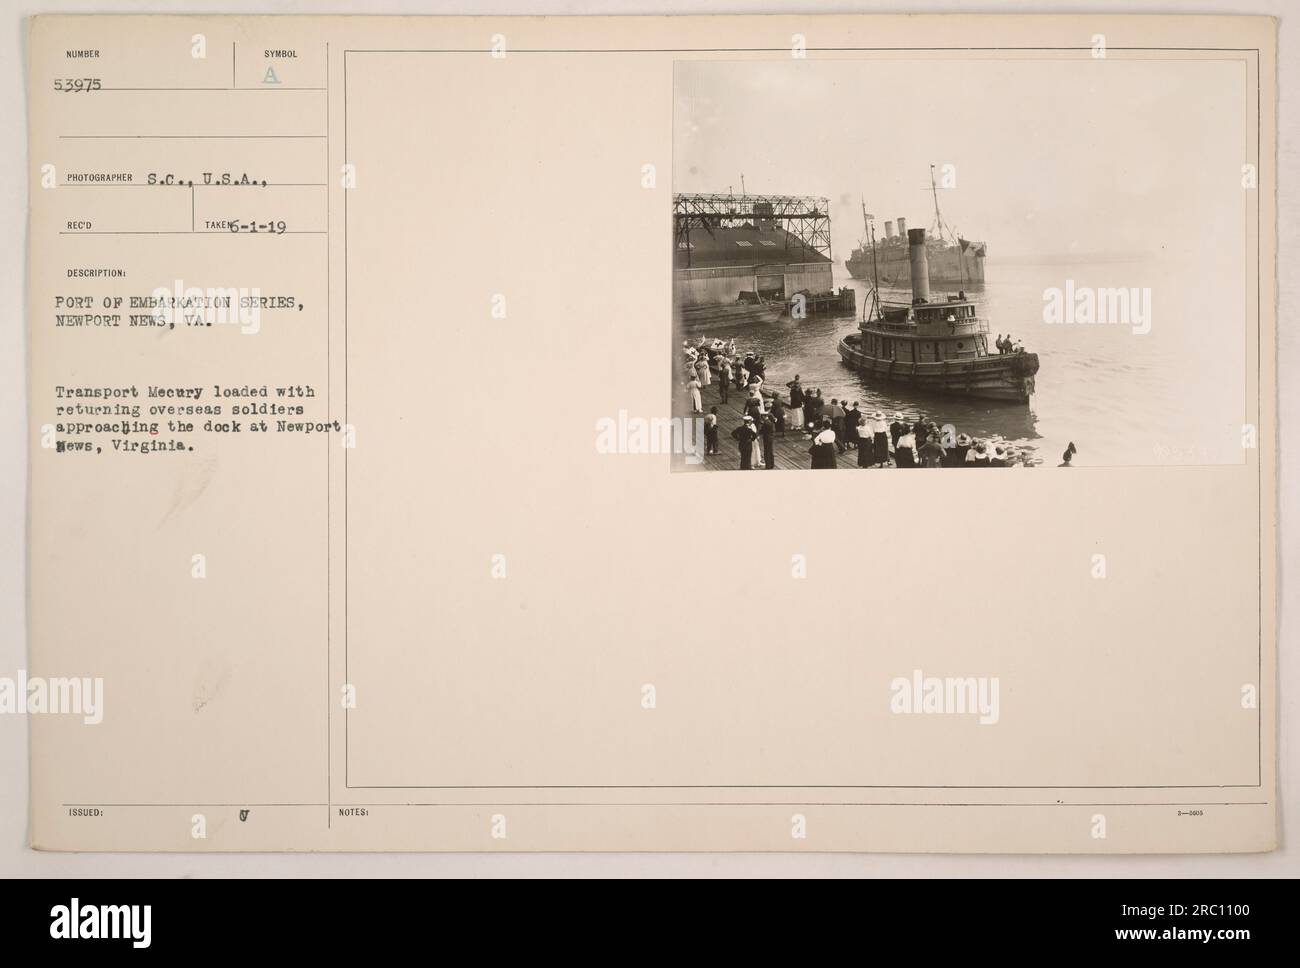 Transport Mecury bringing home overseas soldiers arrives at the dock in Newport News, Virginia. The photograph was taken on June 1, 1919, as part of the Port of Embarkation series. The soldiers, who were returning from overseas service, can be seen on the vessel. Stock Photo